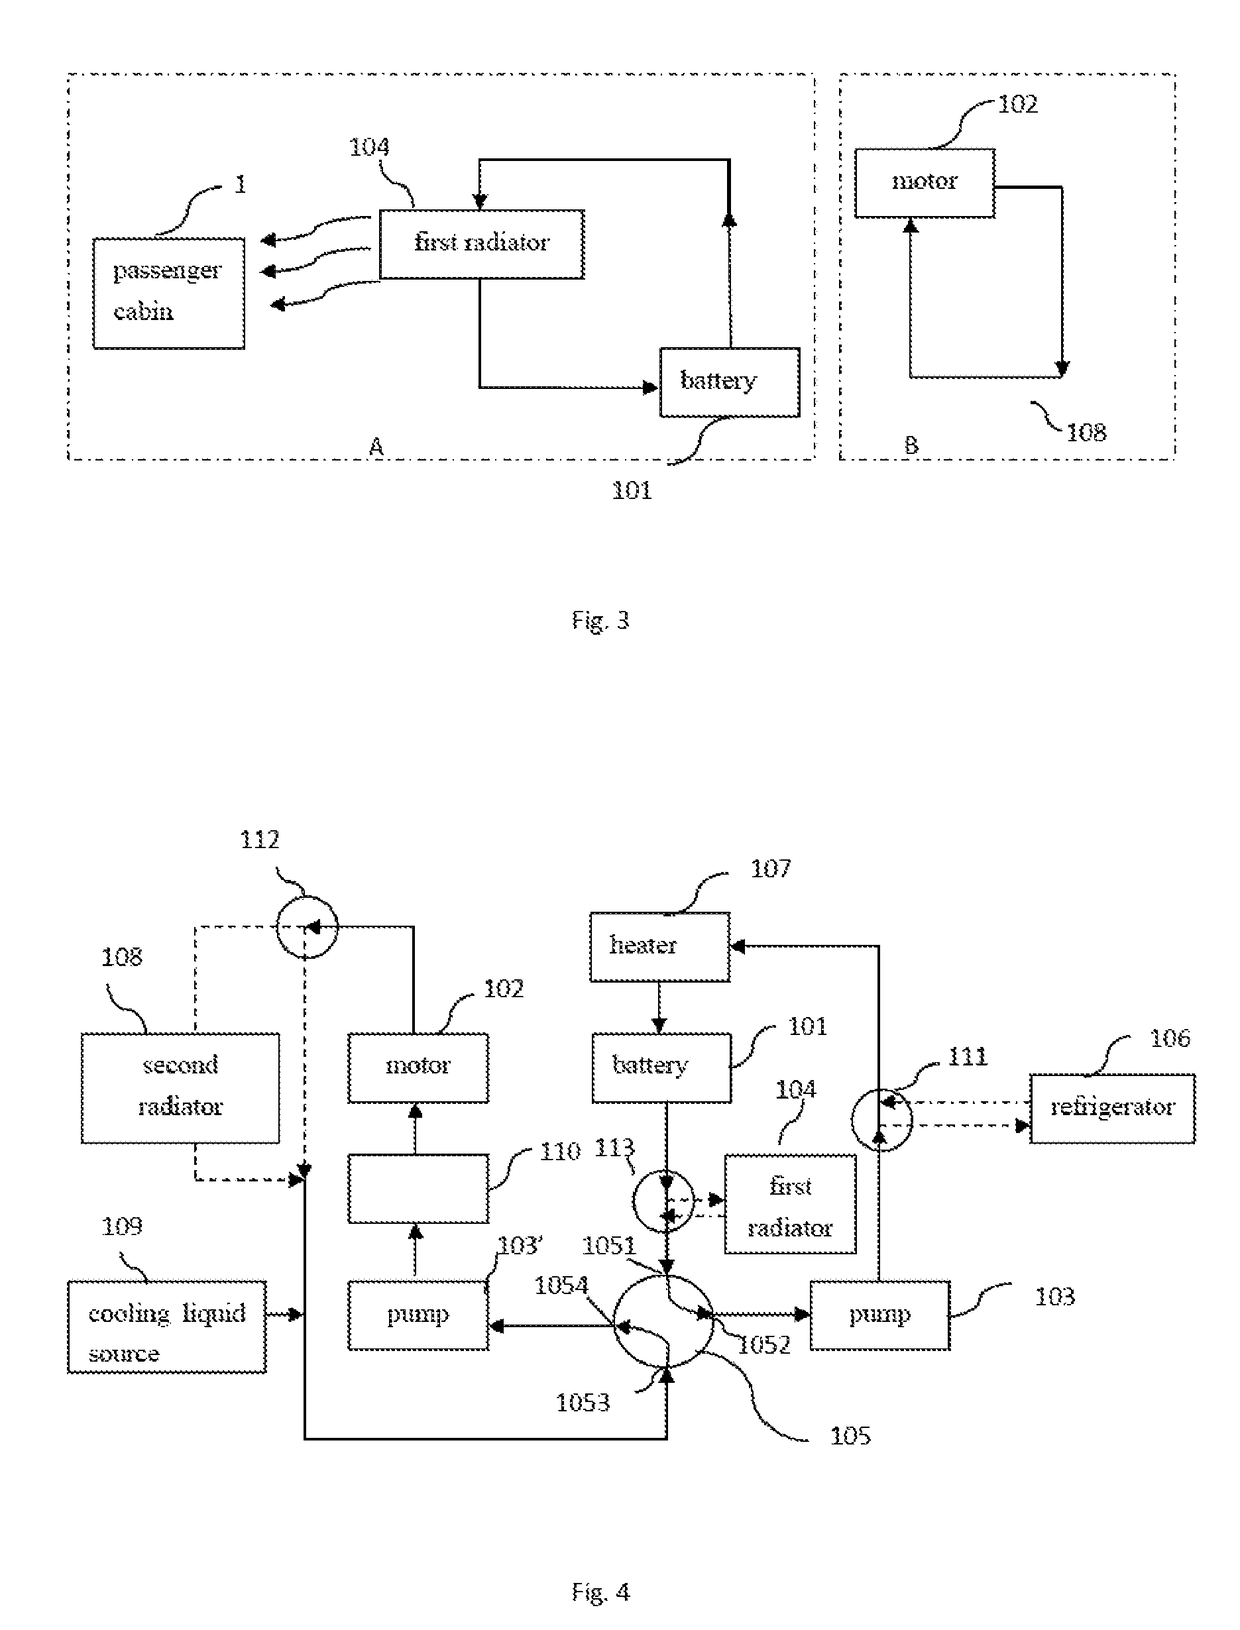 Electric vehicle thermal management system with series and parallel structure